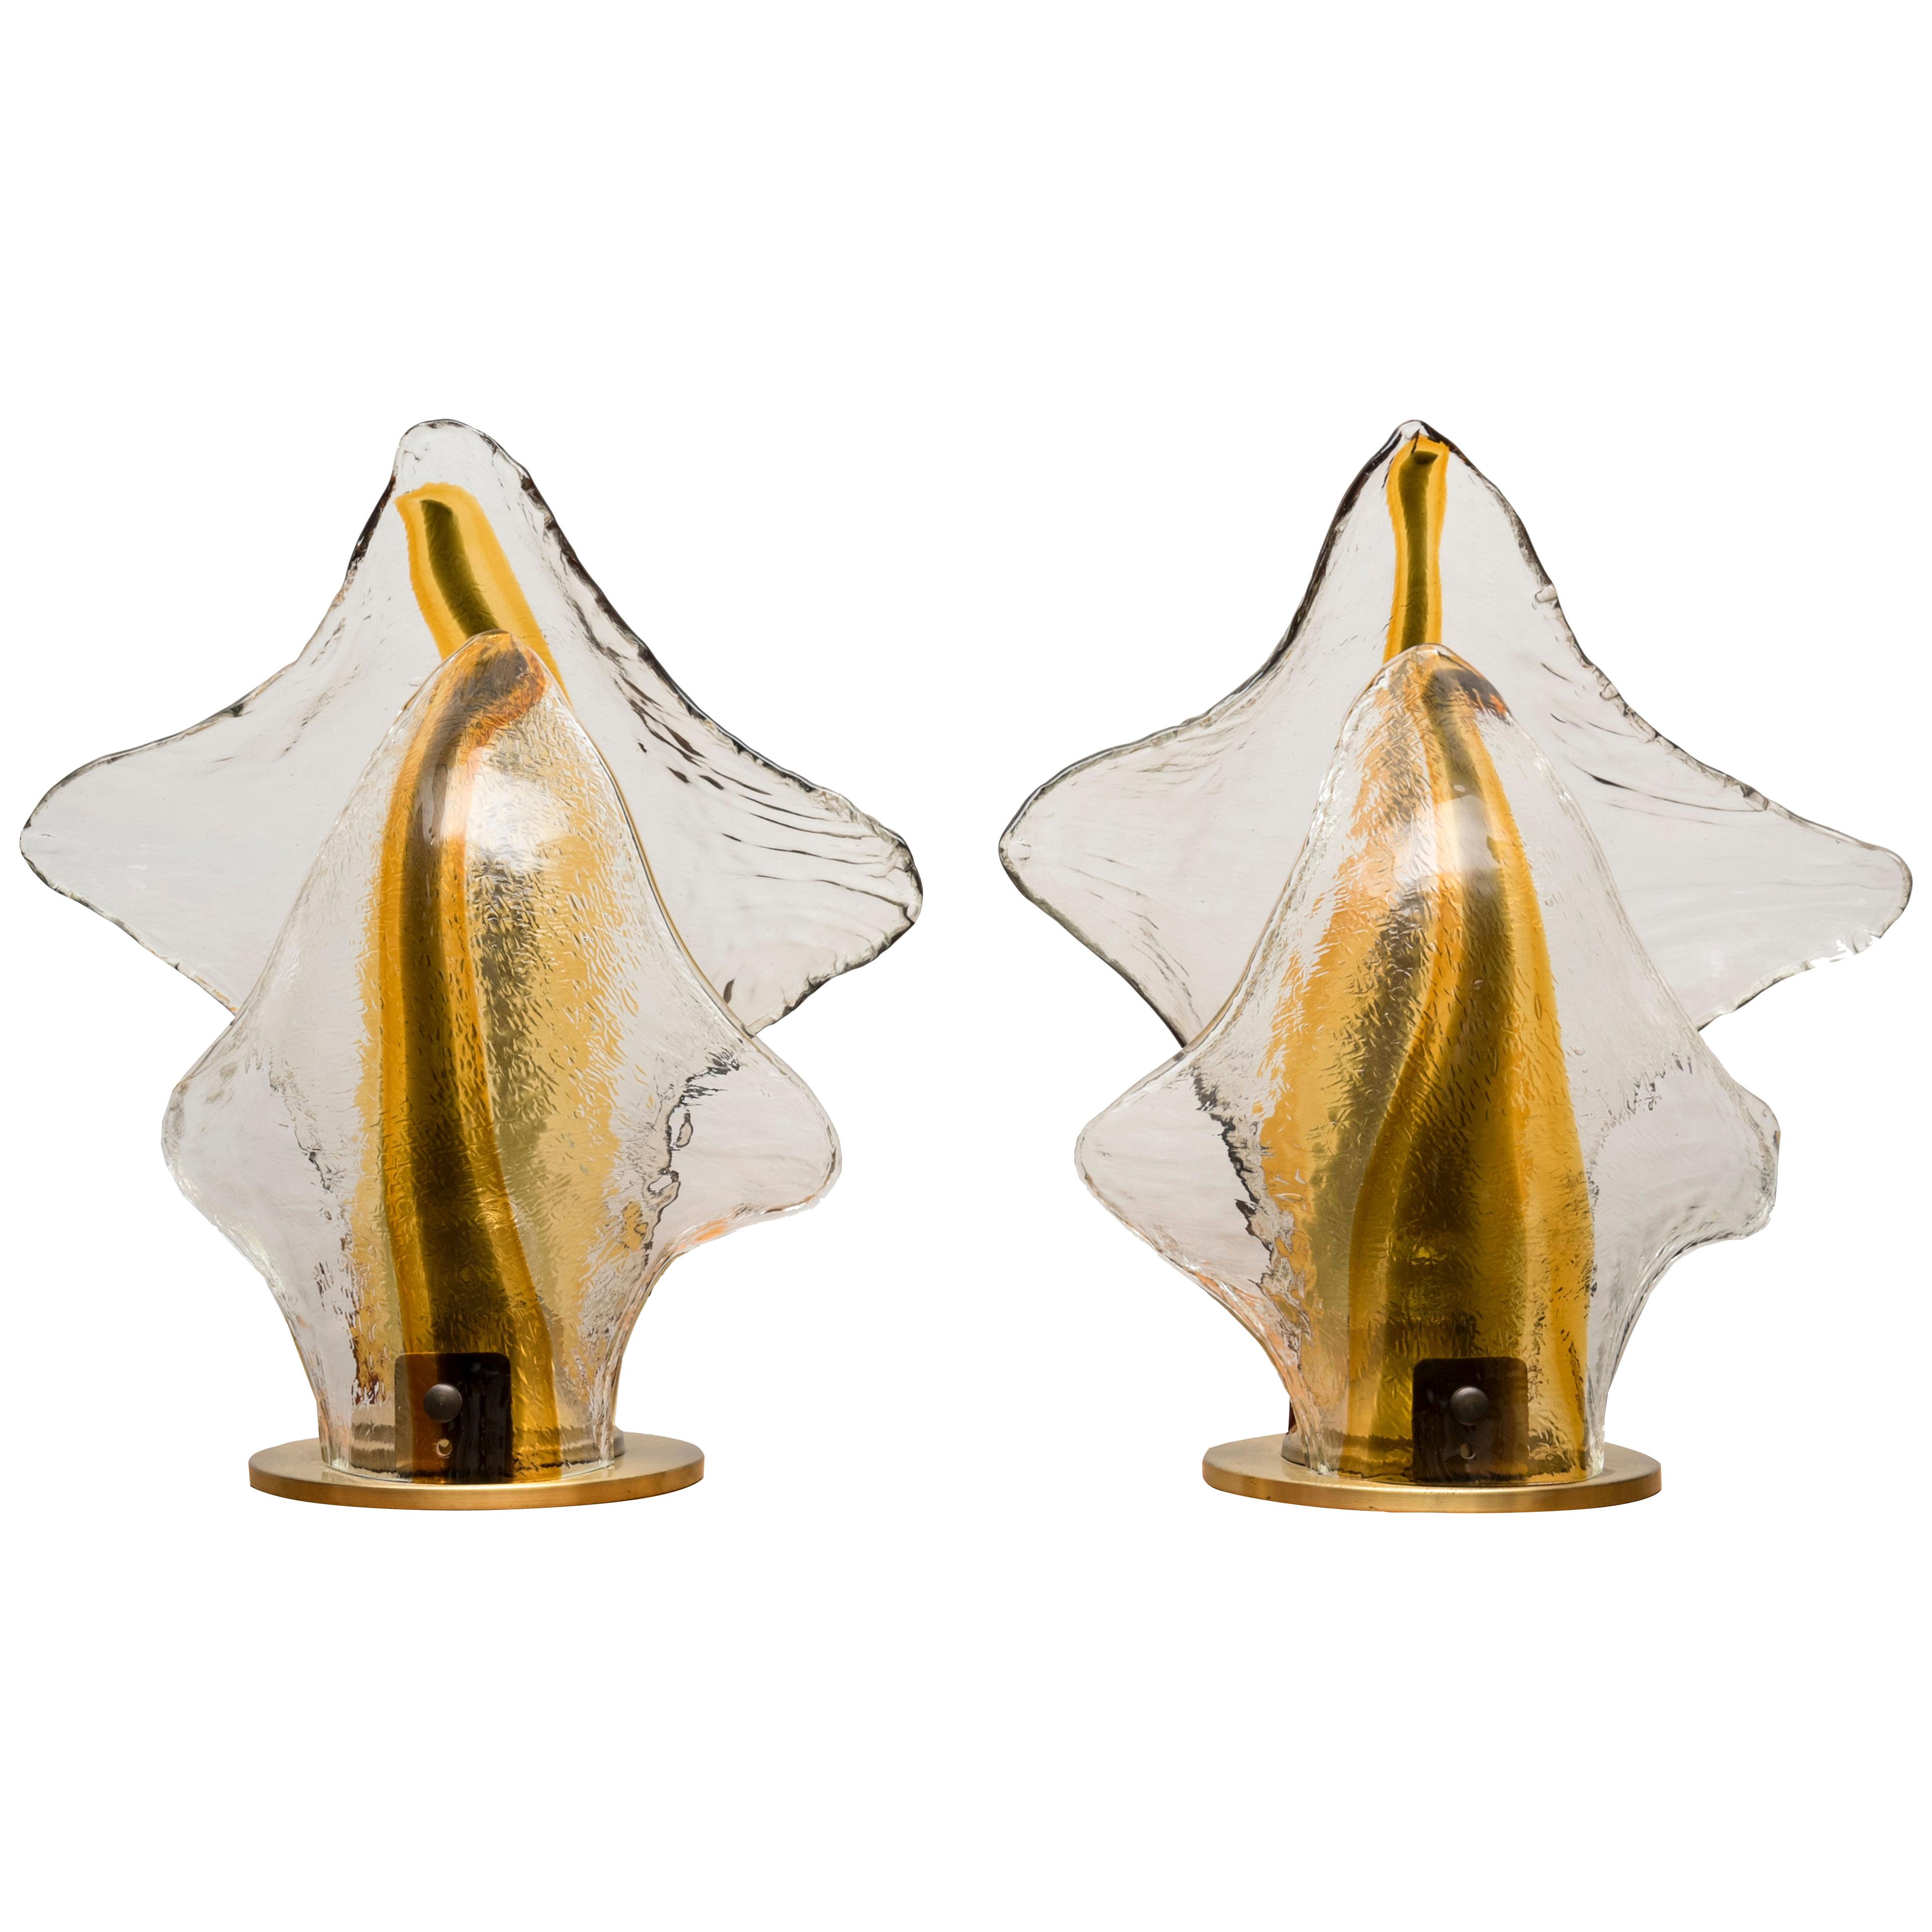 Pair of lamps by Mazzega , circa 1970